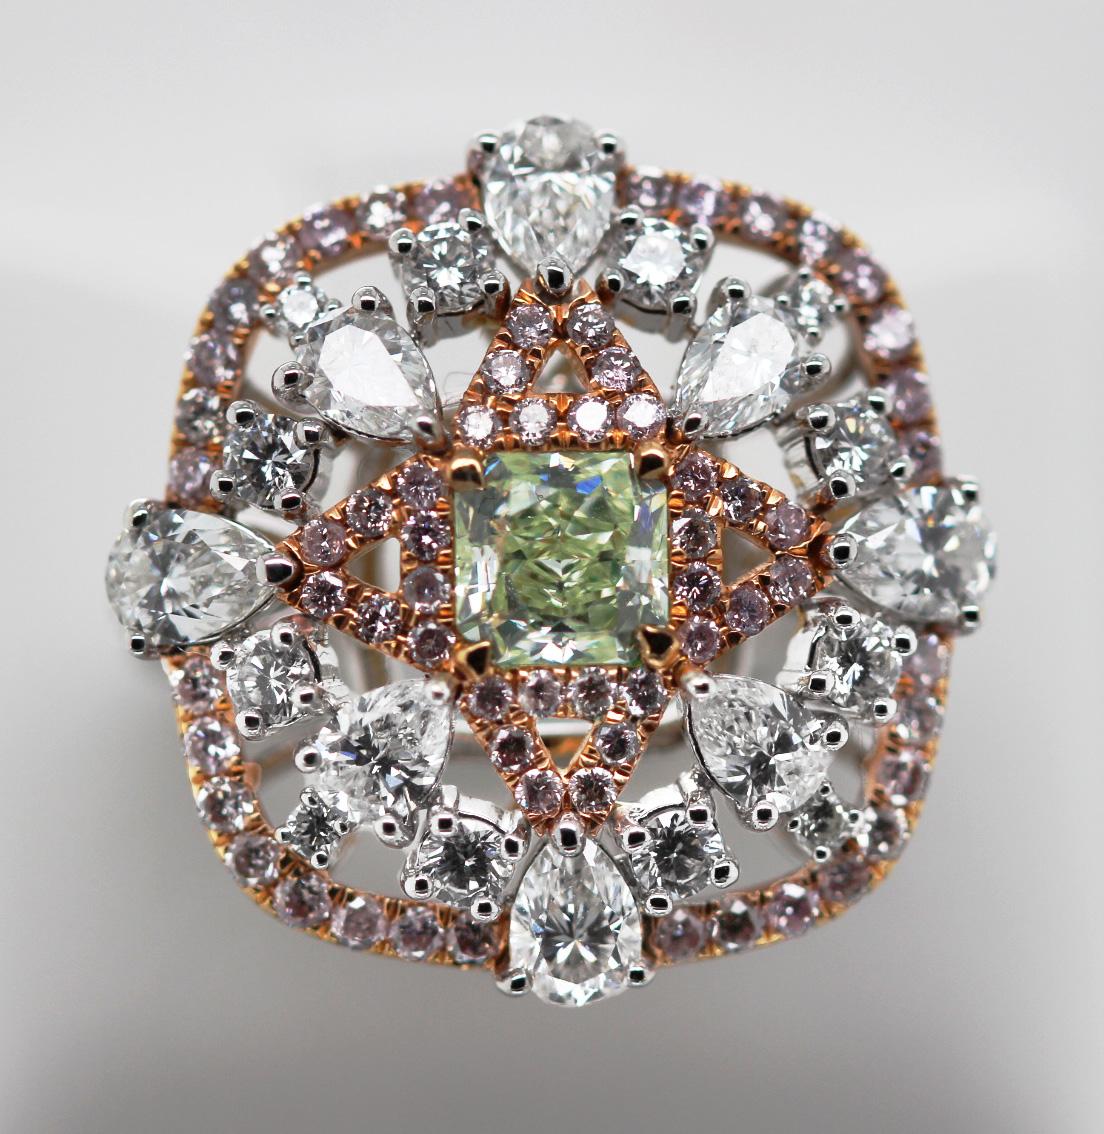 0.78 ct Fancy Light Yellow Green Radiant Cut Diamond Cocktail Ring GIA Scarselli For Sale 1